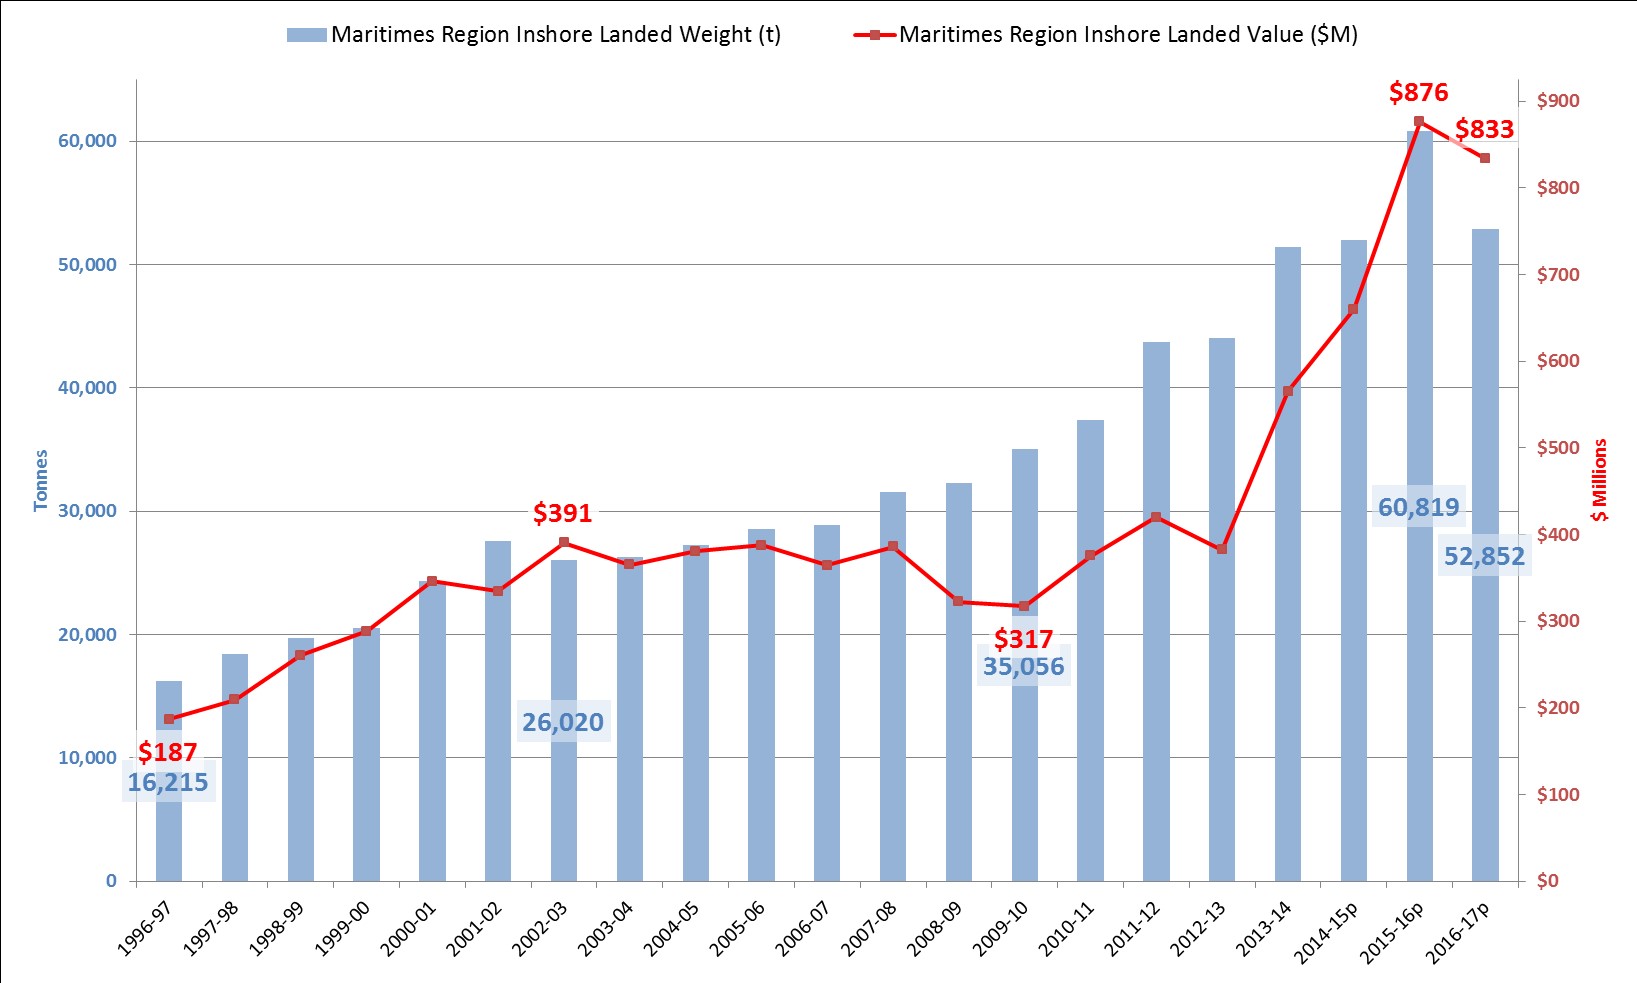 Graphic illustrating the Maritimes Region inshore lobster landed weight and landed value